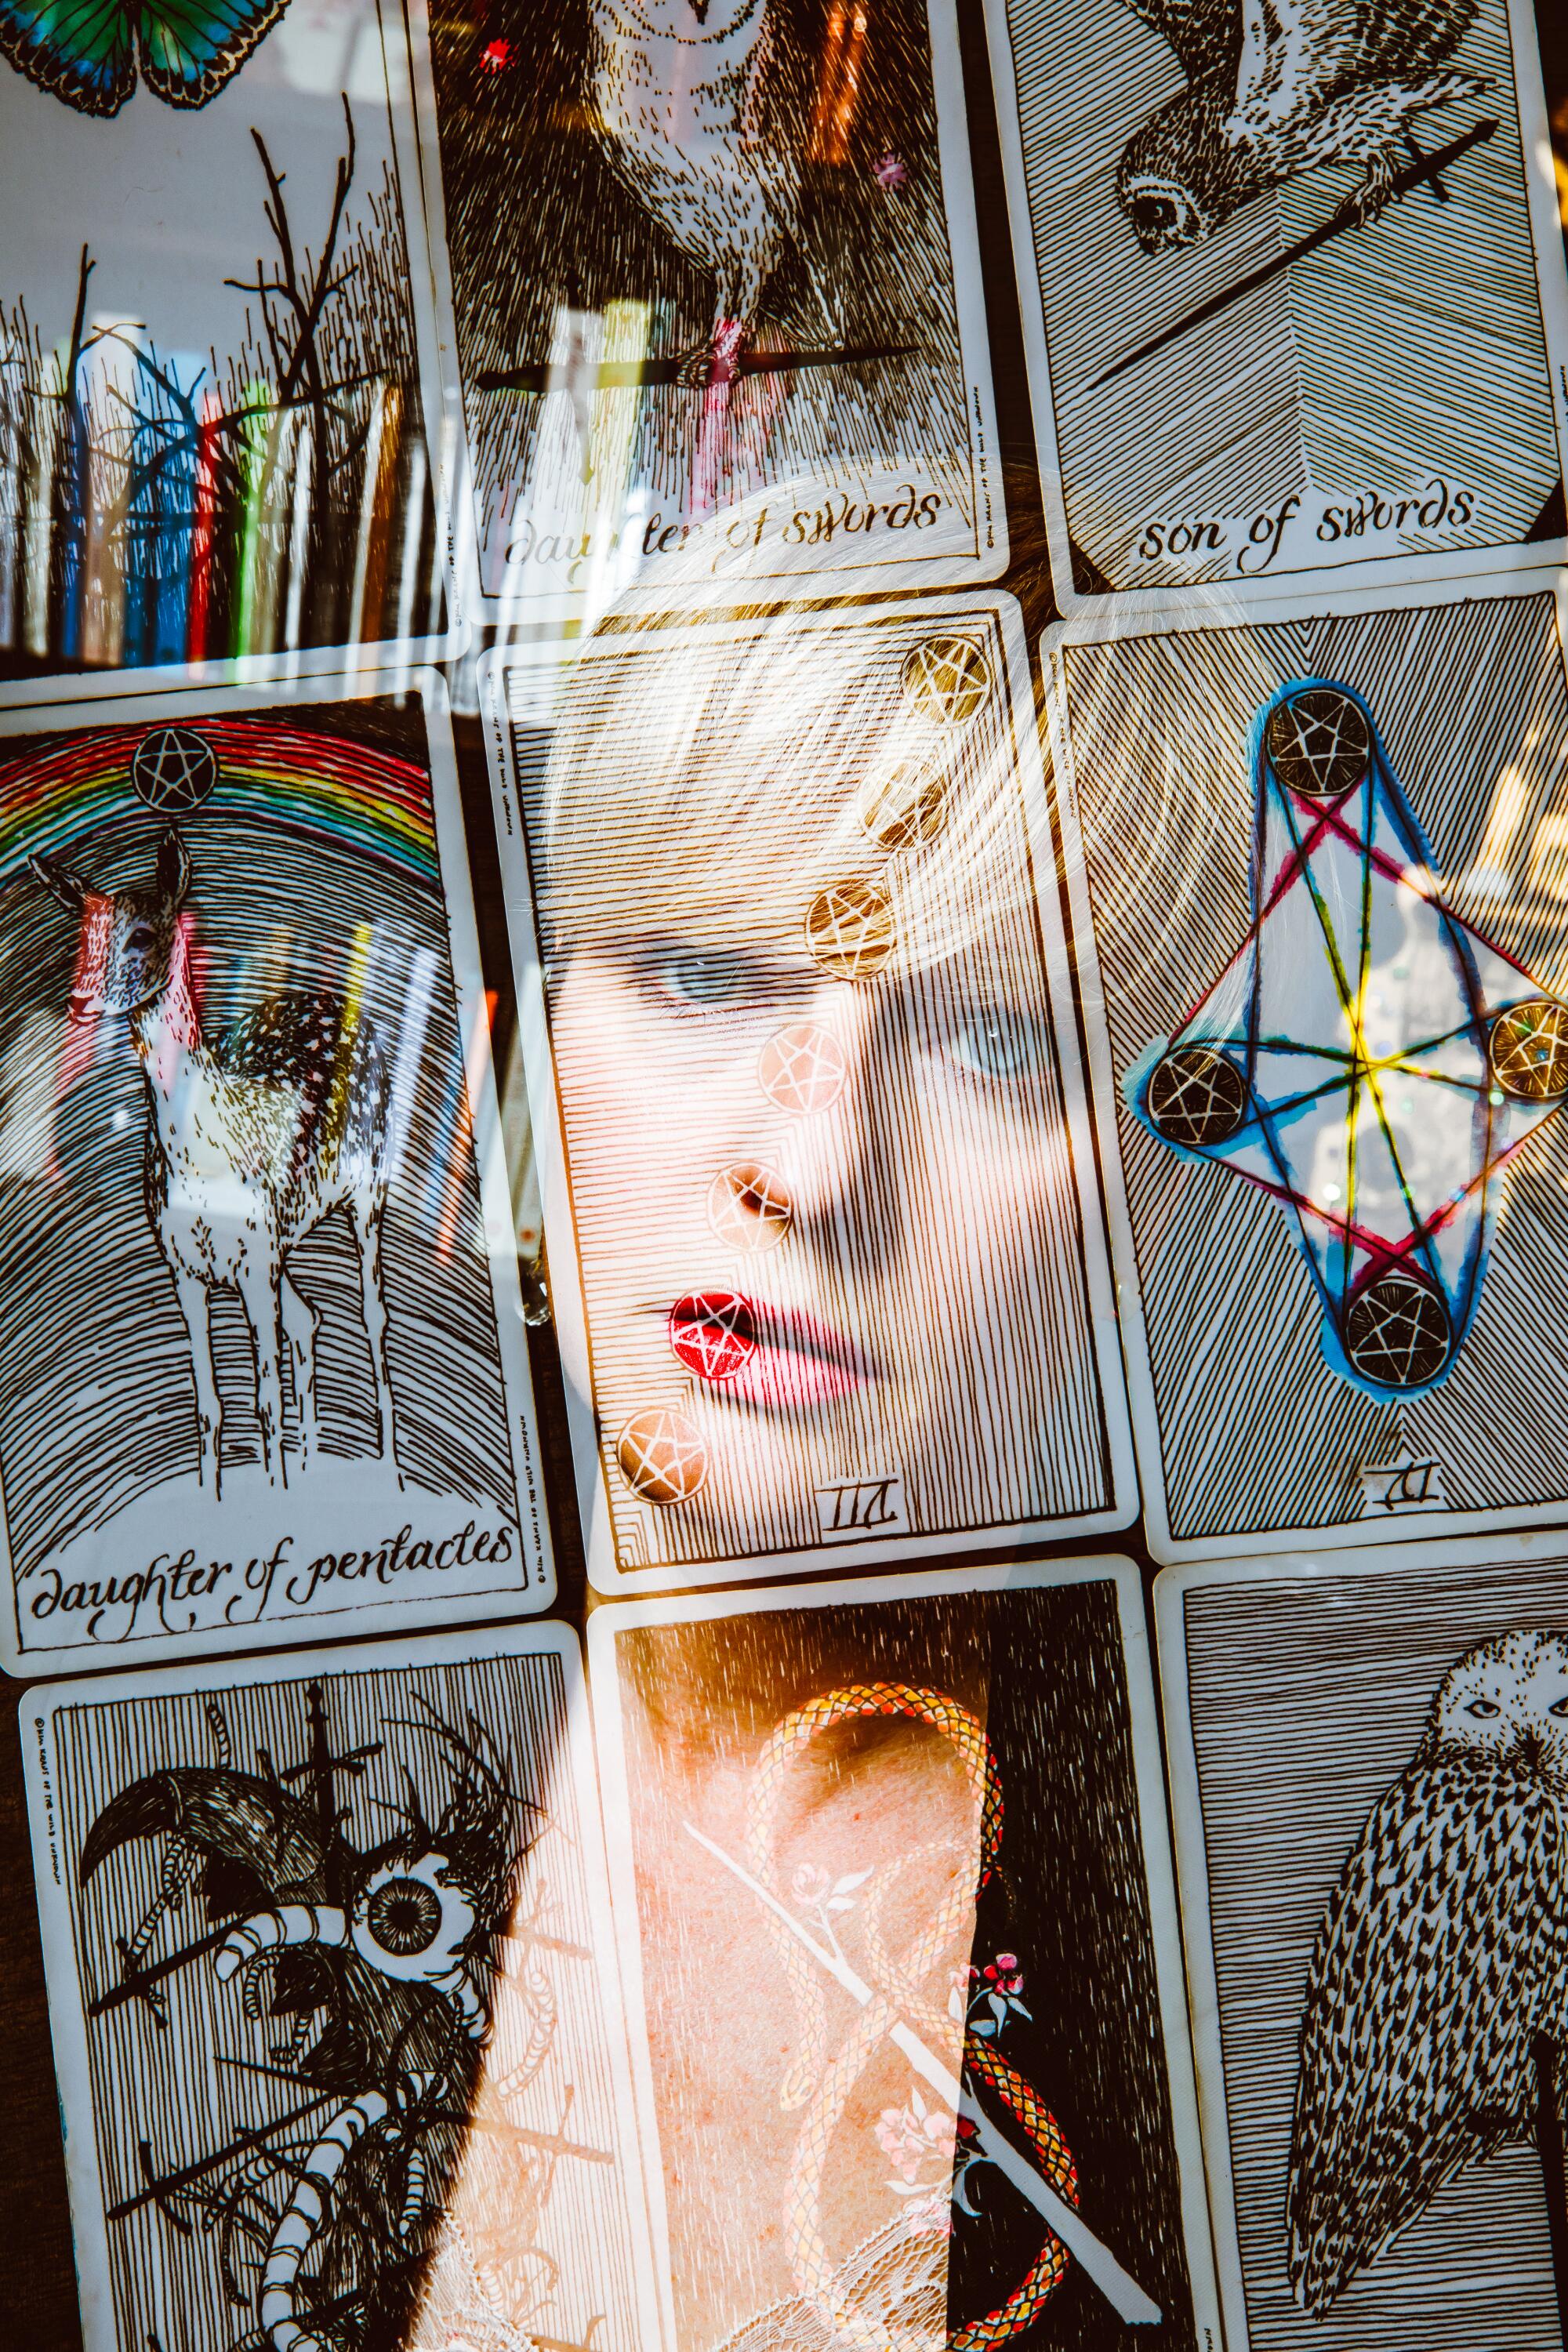 A double exposure of a woman with tarot cards overlaid.